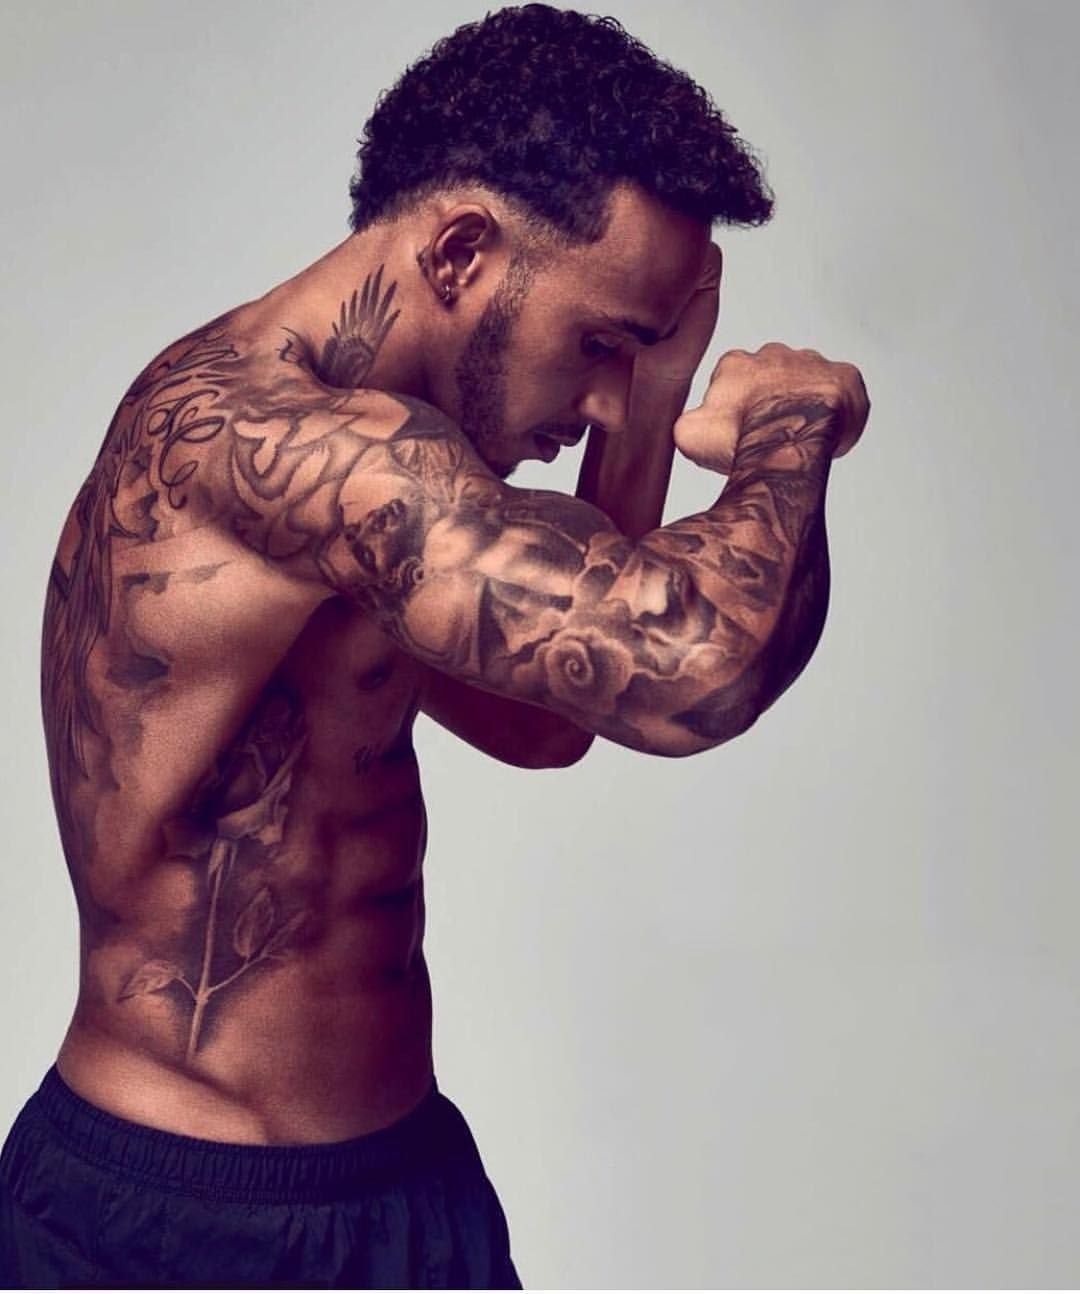 Lewis Hamilton Adds New Ink to His Collection with Fine Line Hand Tattoos